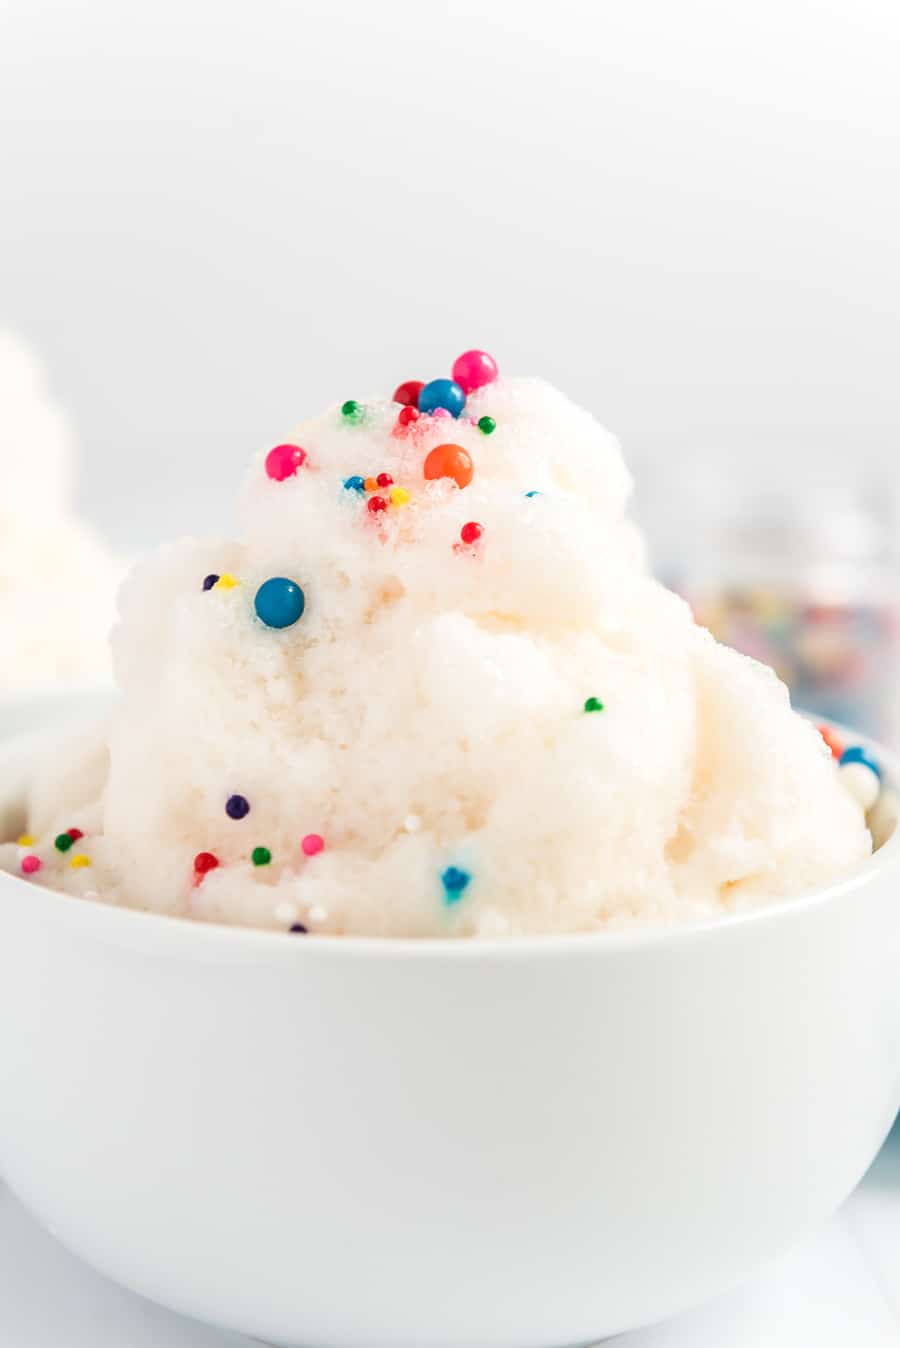 https://www.blessthismessplease.com/wp-content/uploads/2020/02/quick-and-easy-snow-ice-cream-16.jpg